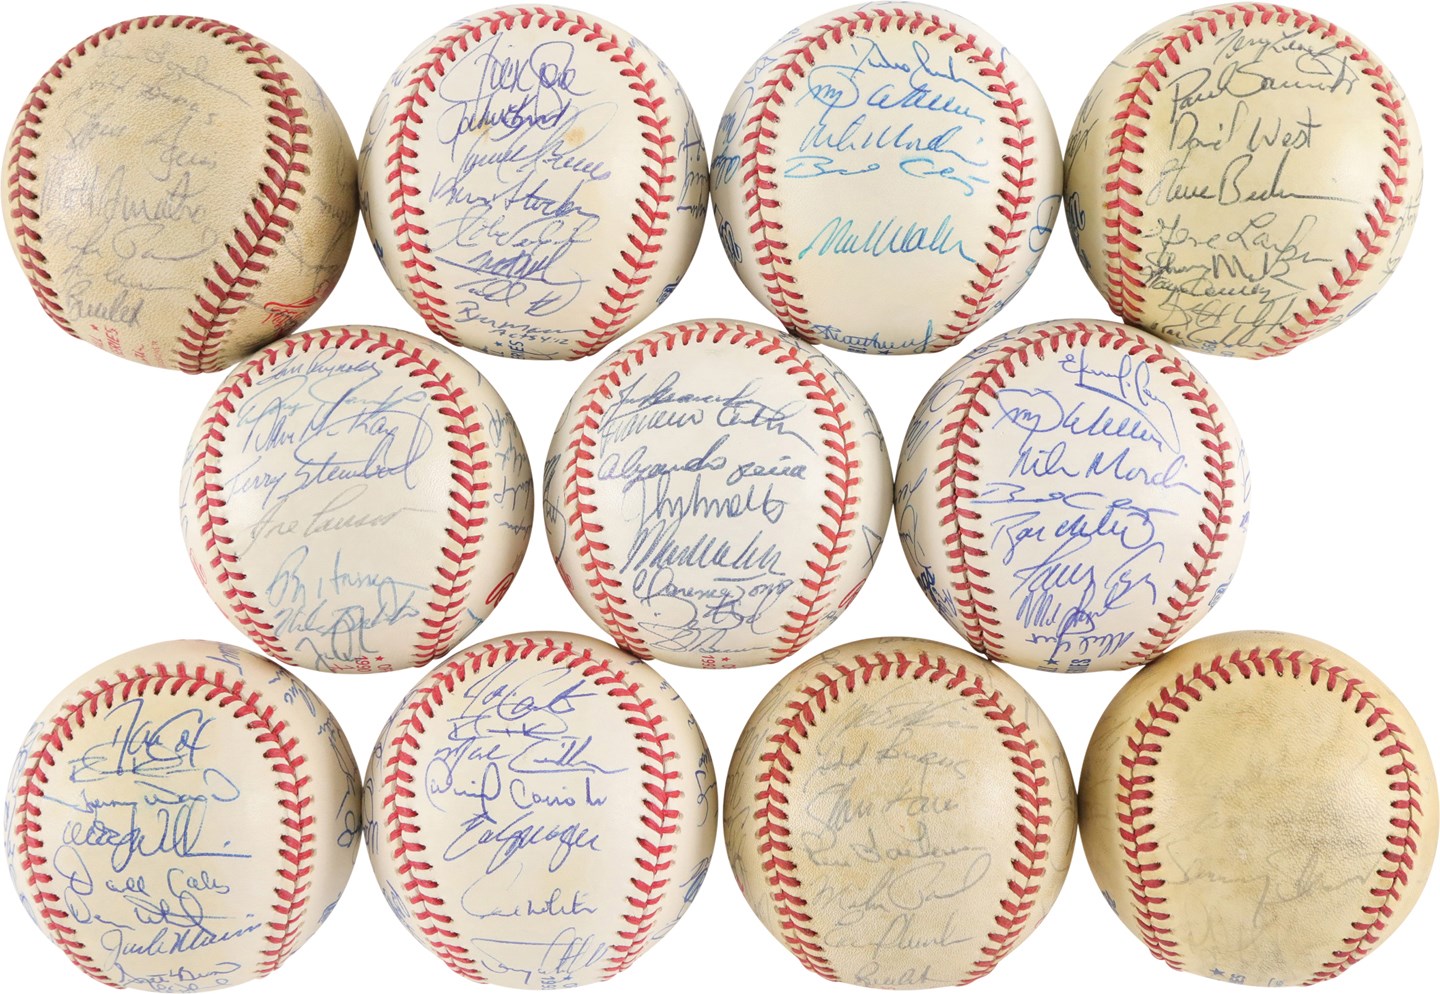 1979-95 World Series Team-Signed Baseball Collection (16)